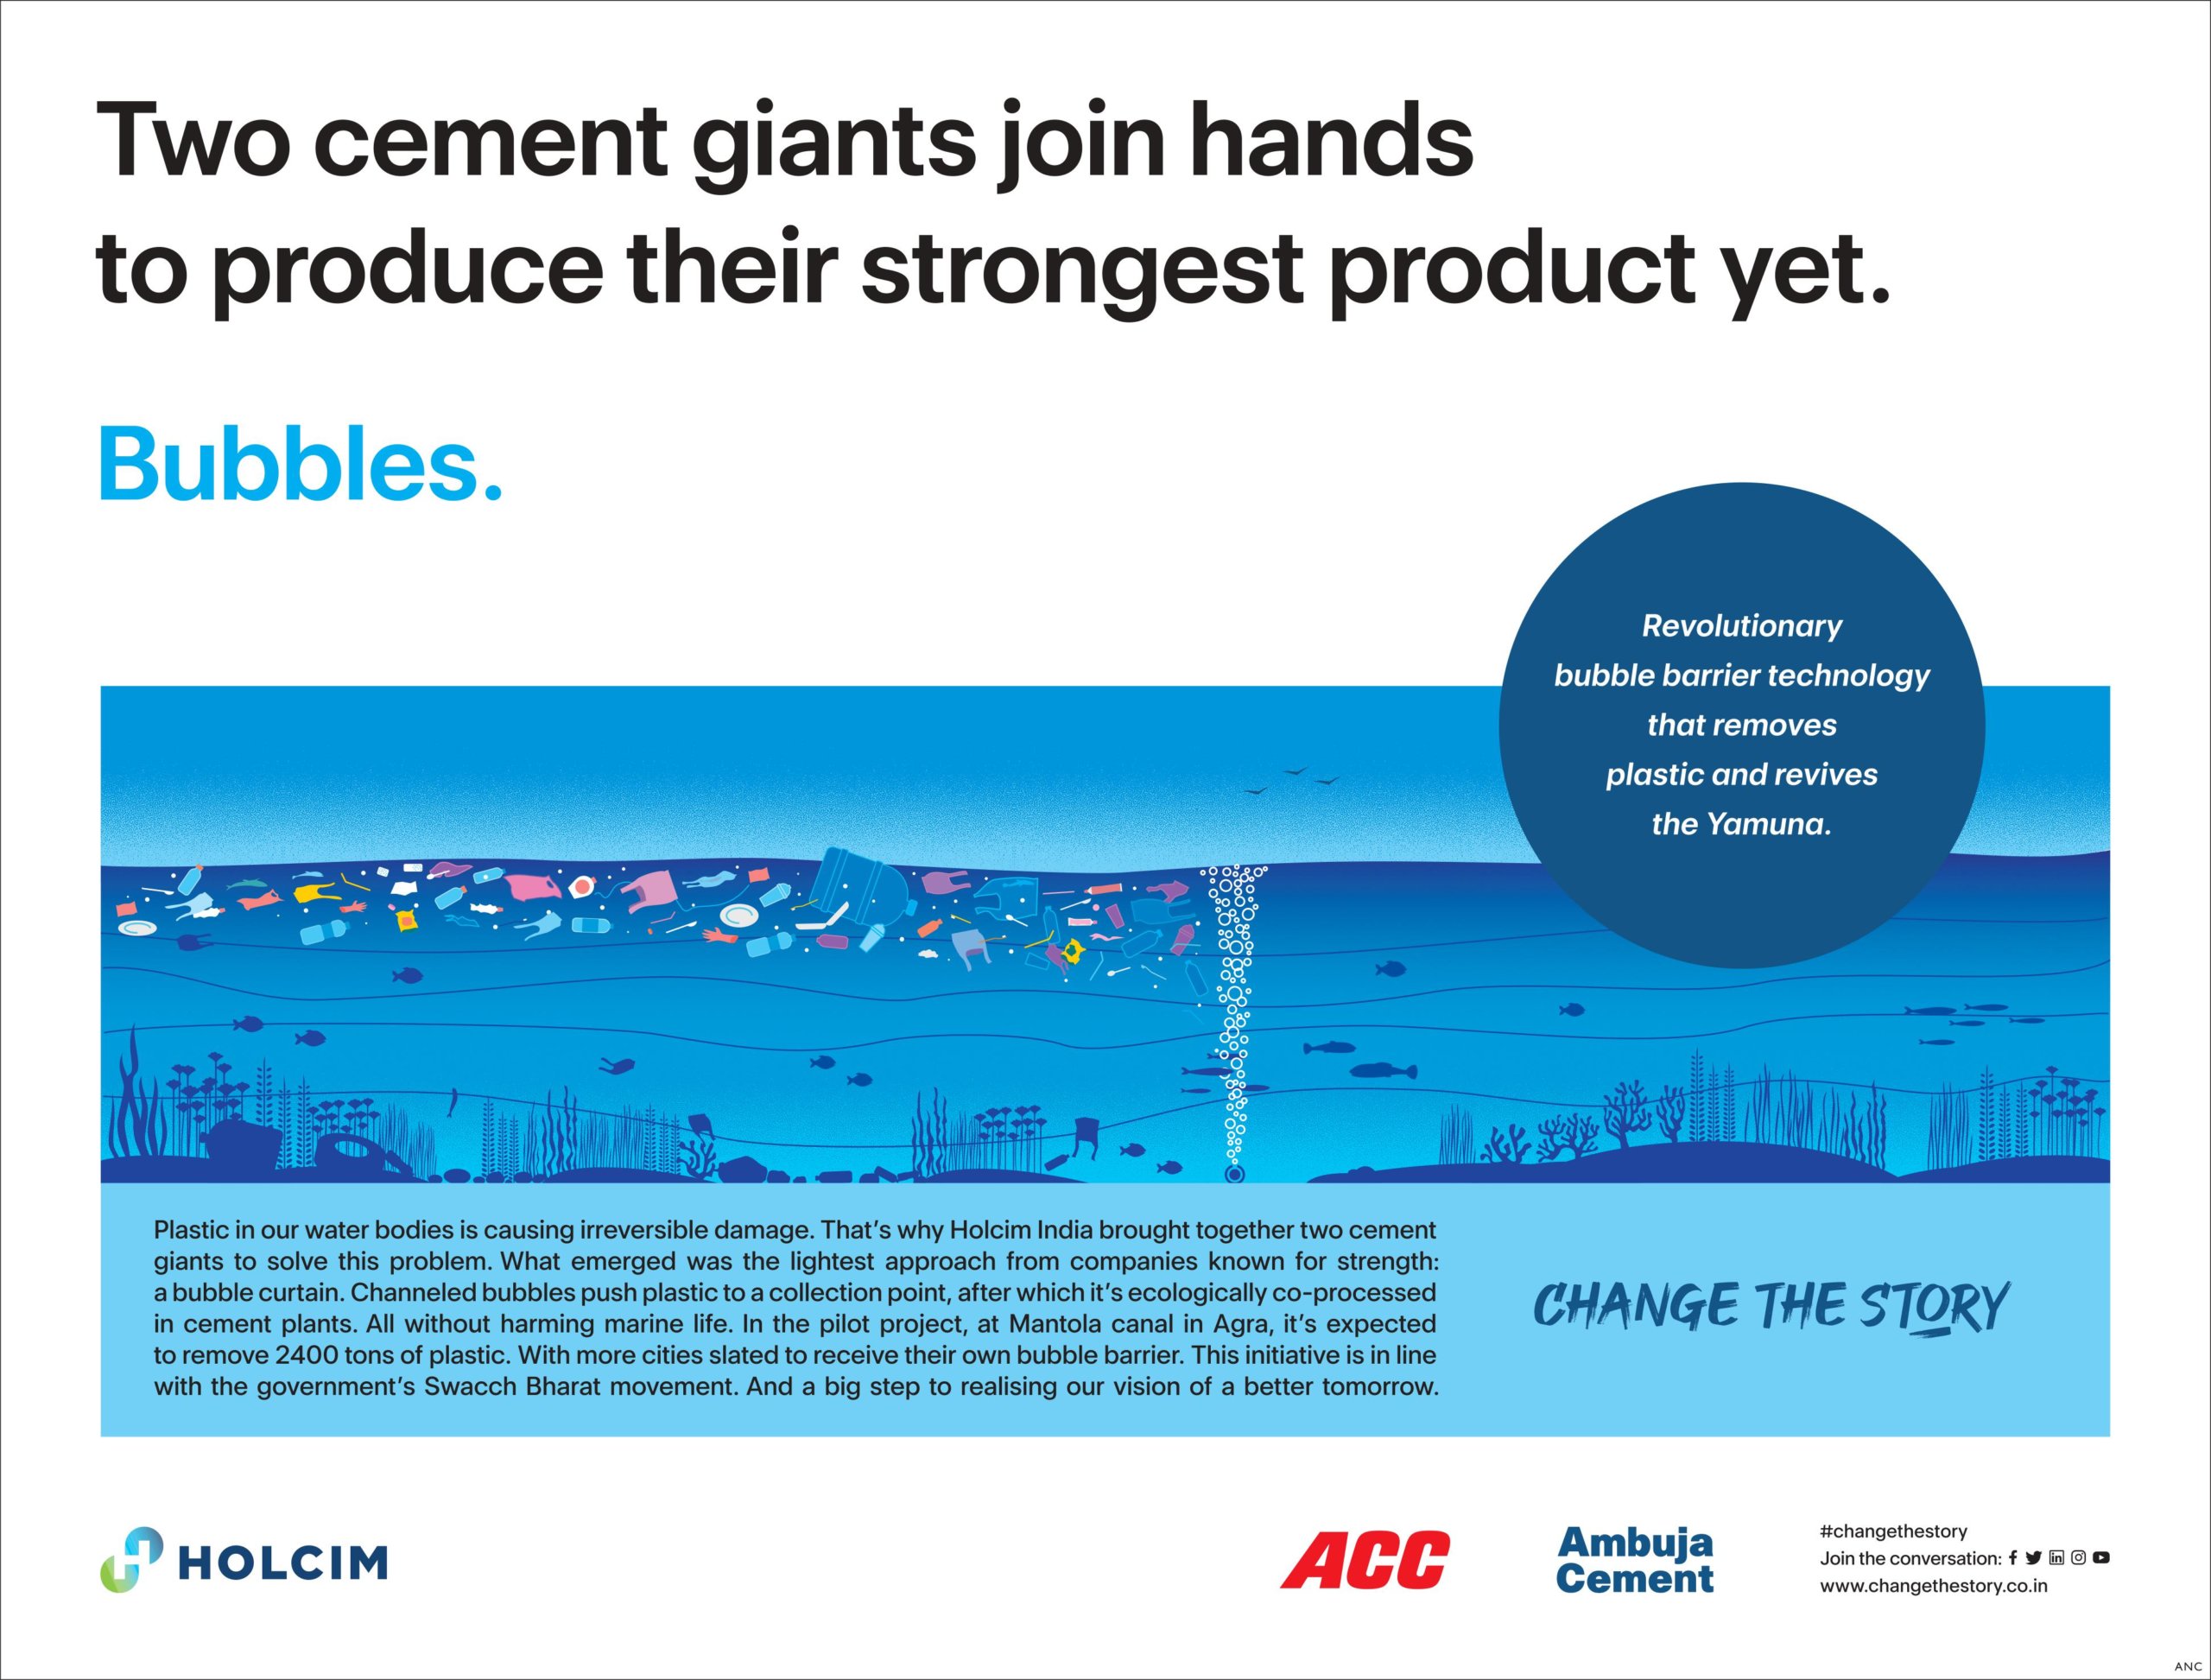 Holcim India and its two Operating Companies-Ambuja Cements and ACC launch their first Sustainability campaign #ChangeTheStory reinforcing their commitment to build a green future